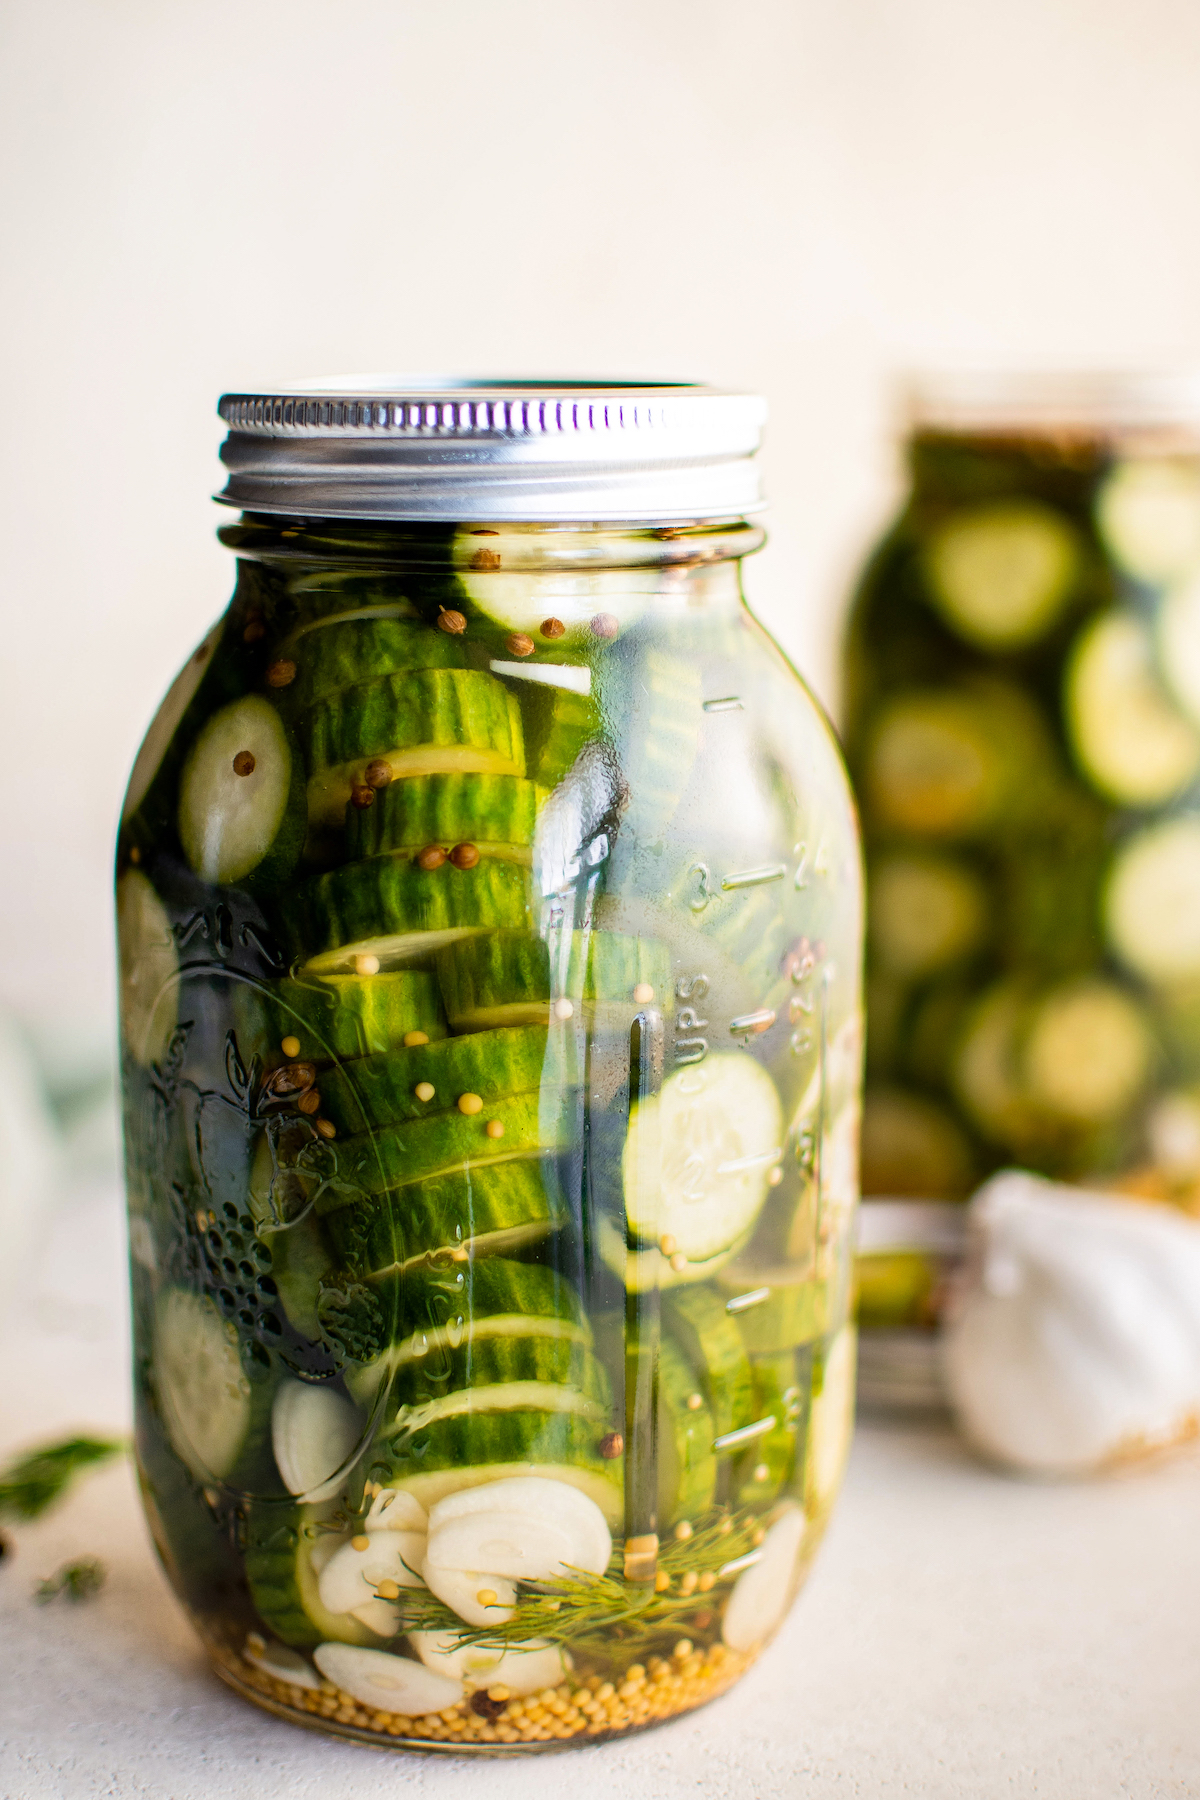 Jar of dill pickles in brine and whole spices.